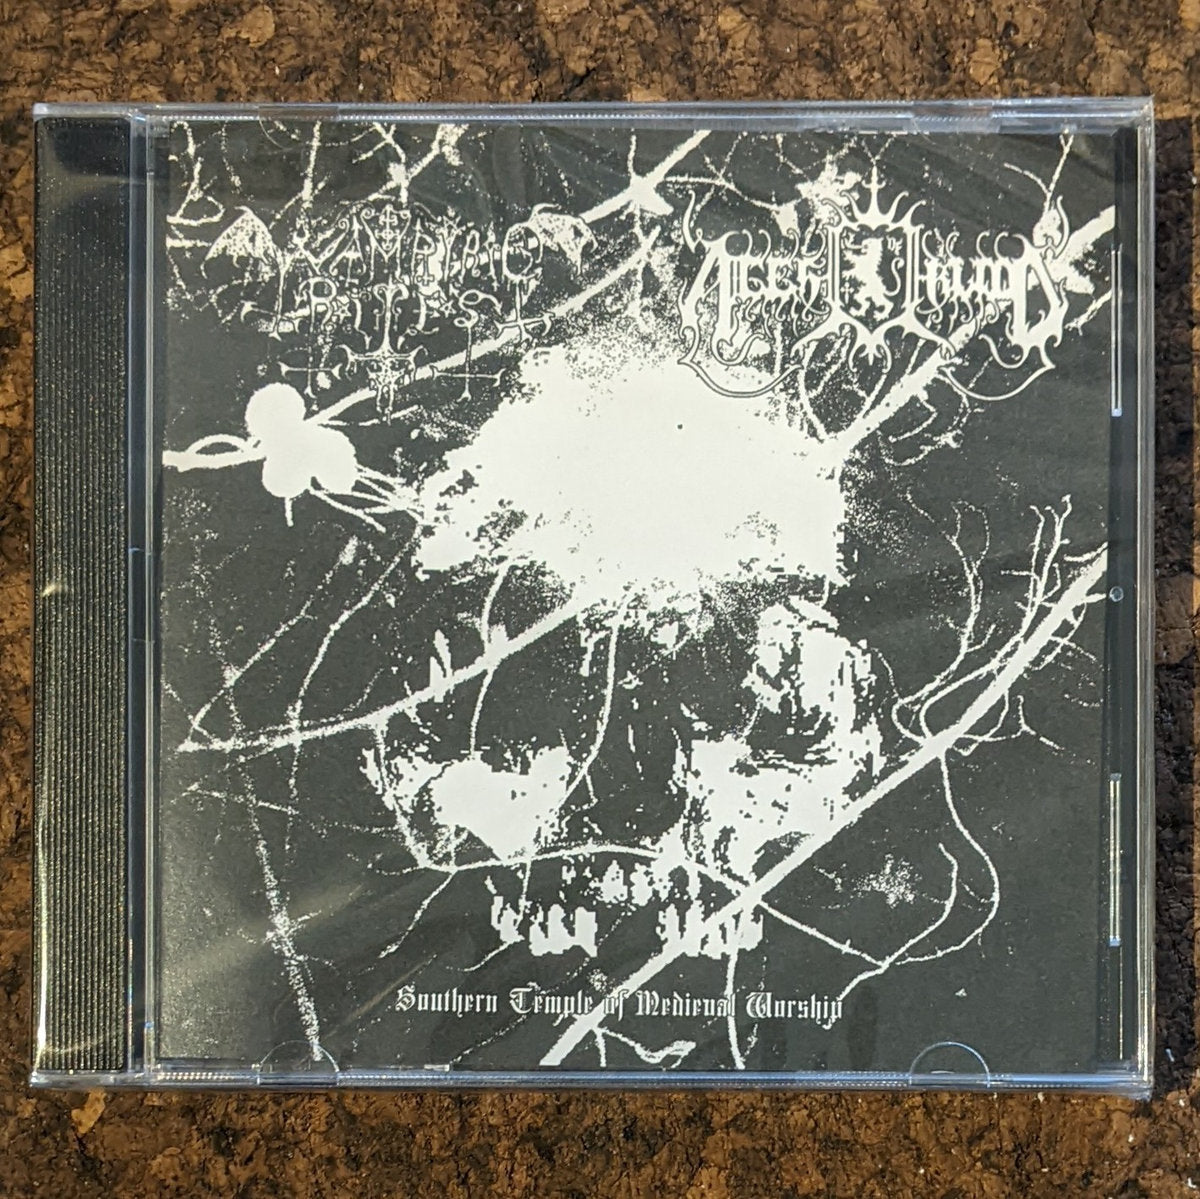 WAMPYRIC RITES / AGES OF BLOOD "Southern Temple of Medieval Worship" CD (lim.200)